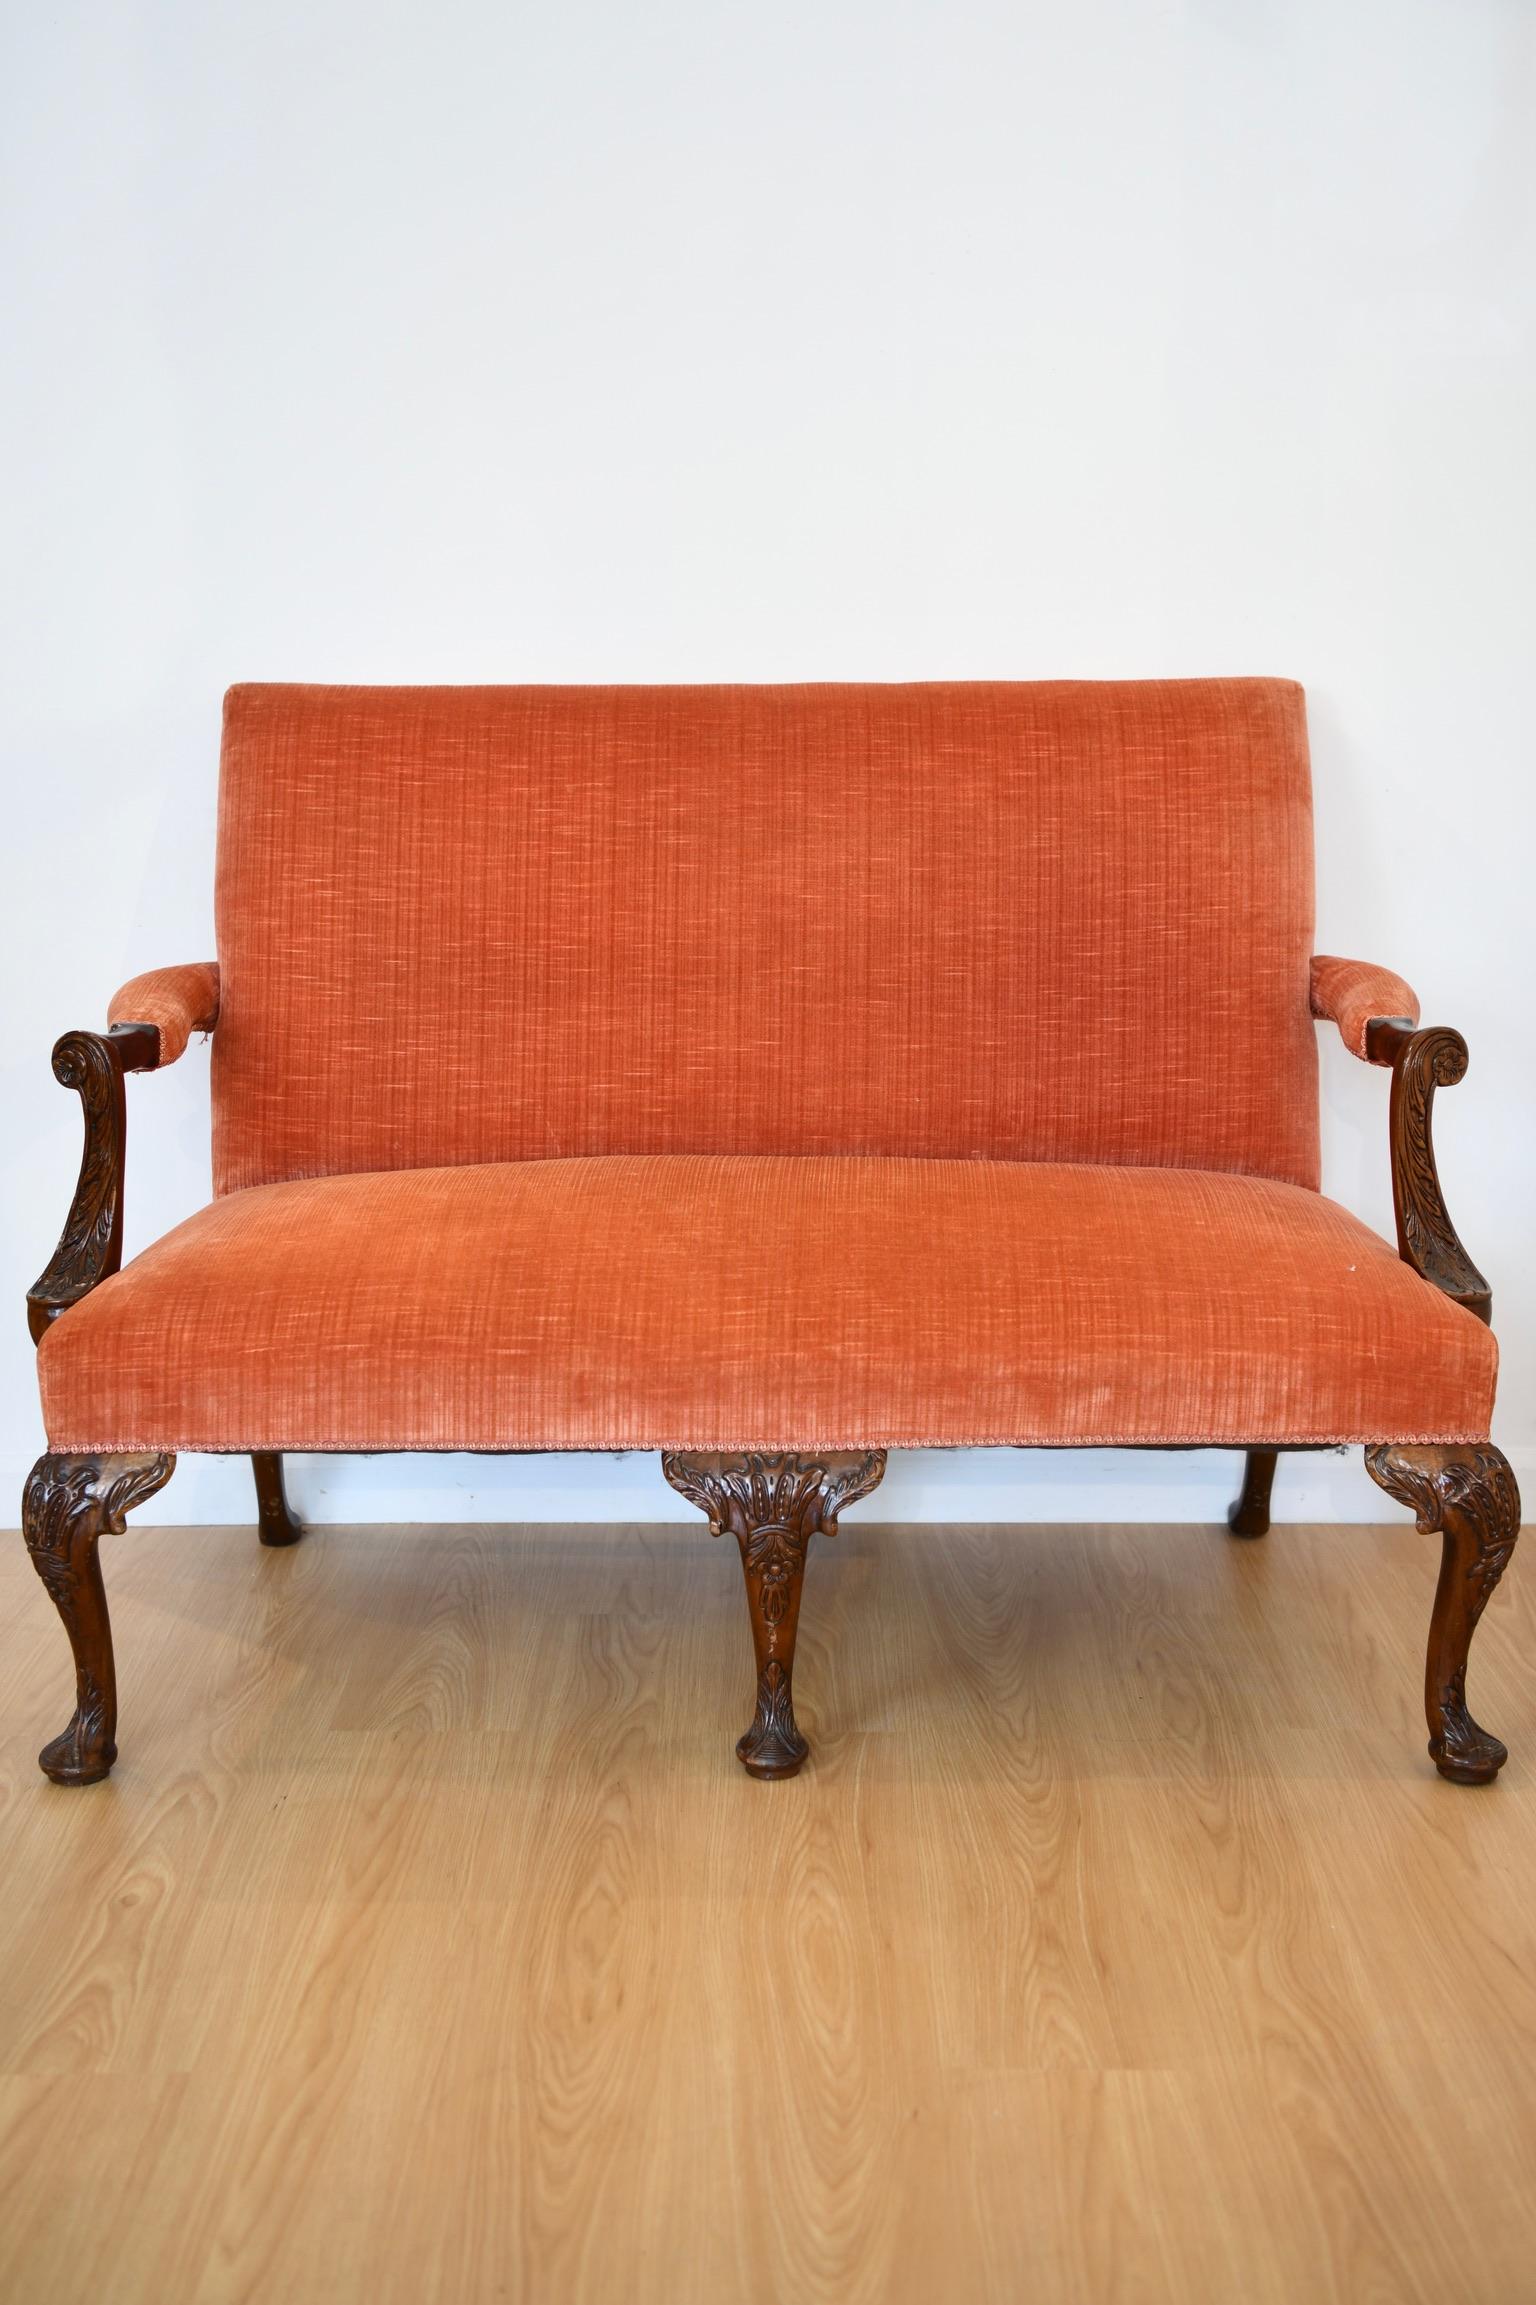 Intricately carved mahogany settee in the style of George II with open arms above detail carved pad feet and blood orange upholstery. Dimensions: 38